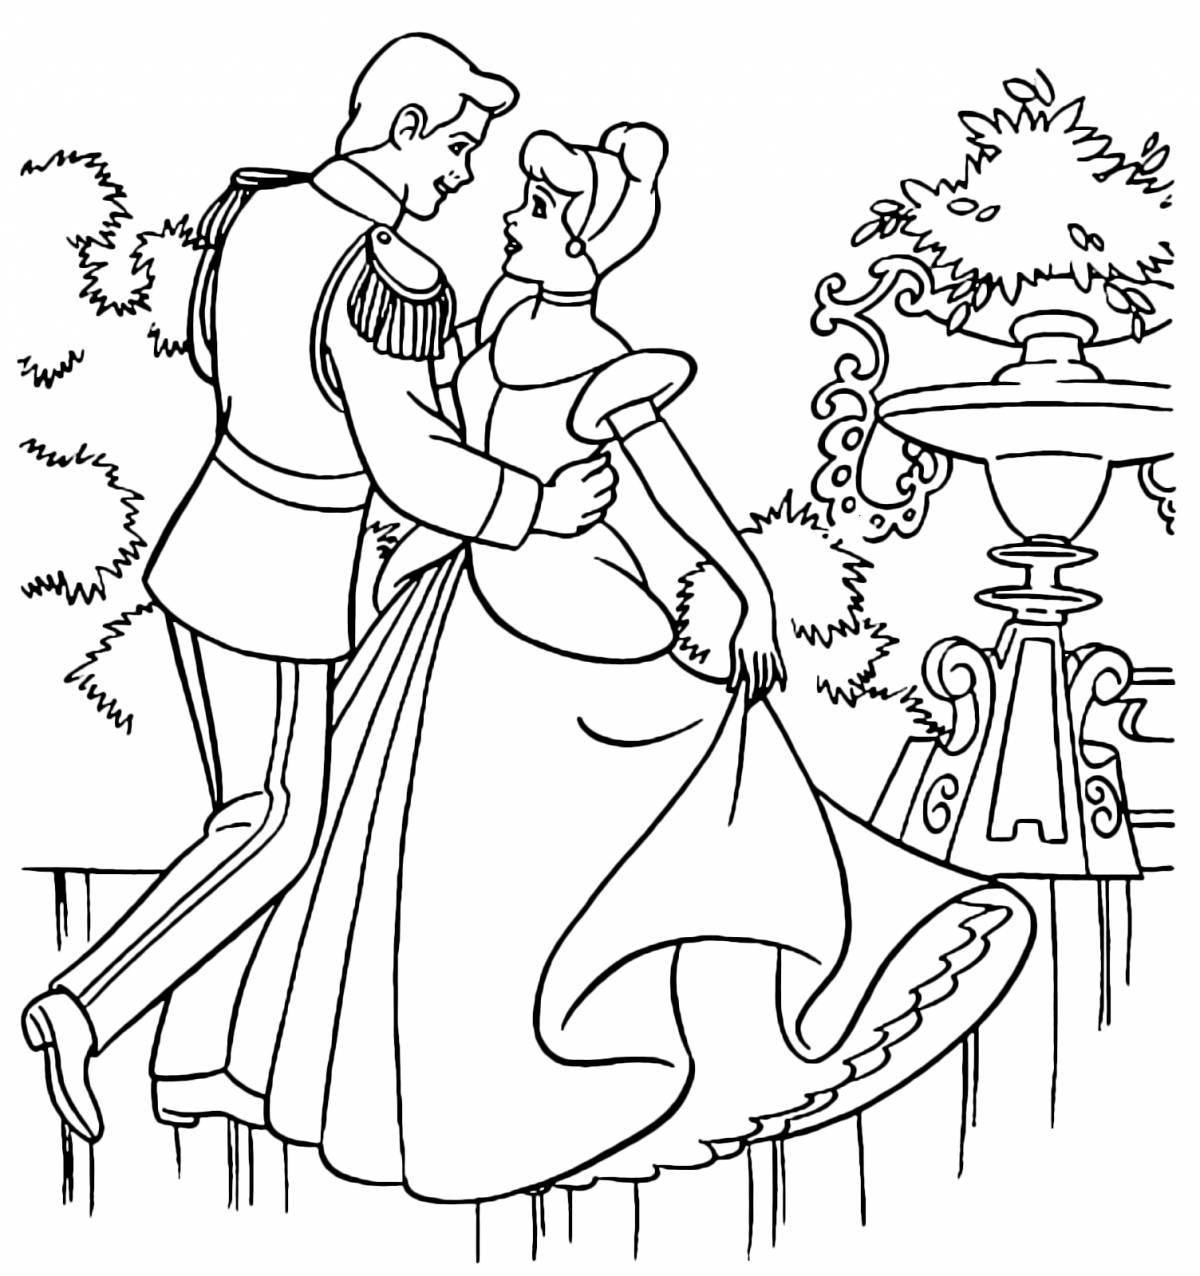 Exquisite prince and princess coloring book